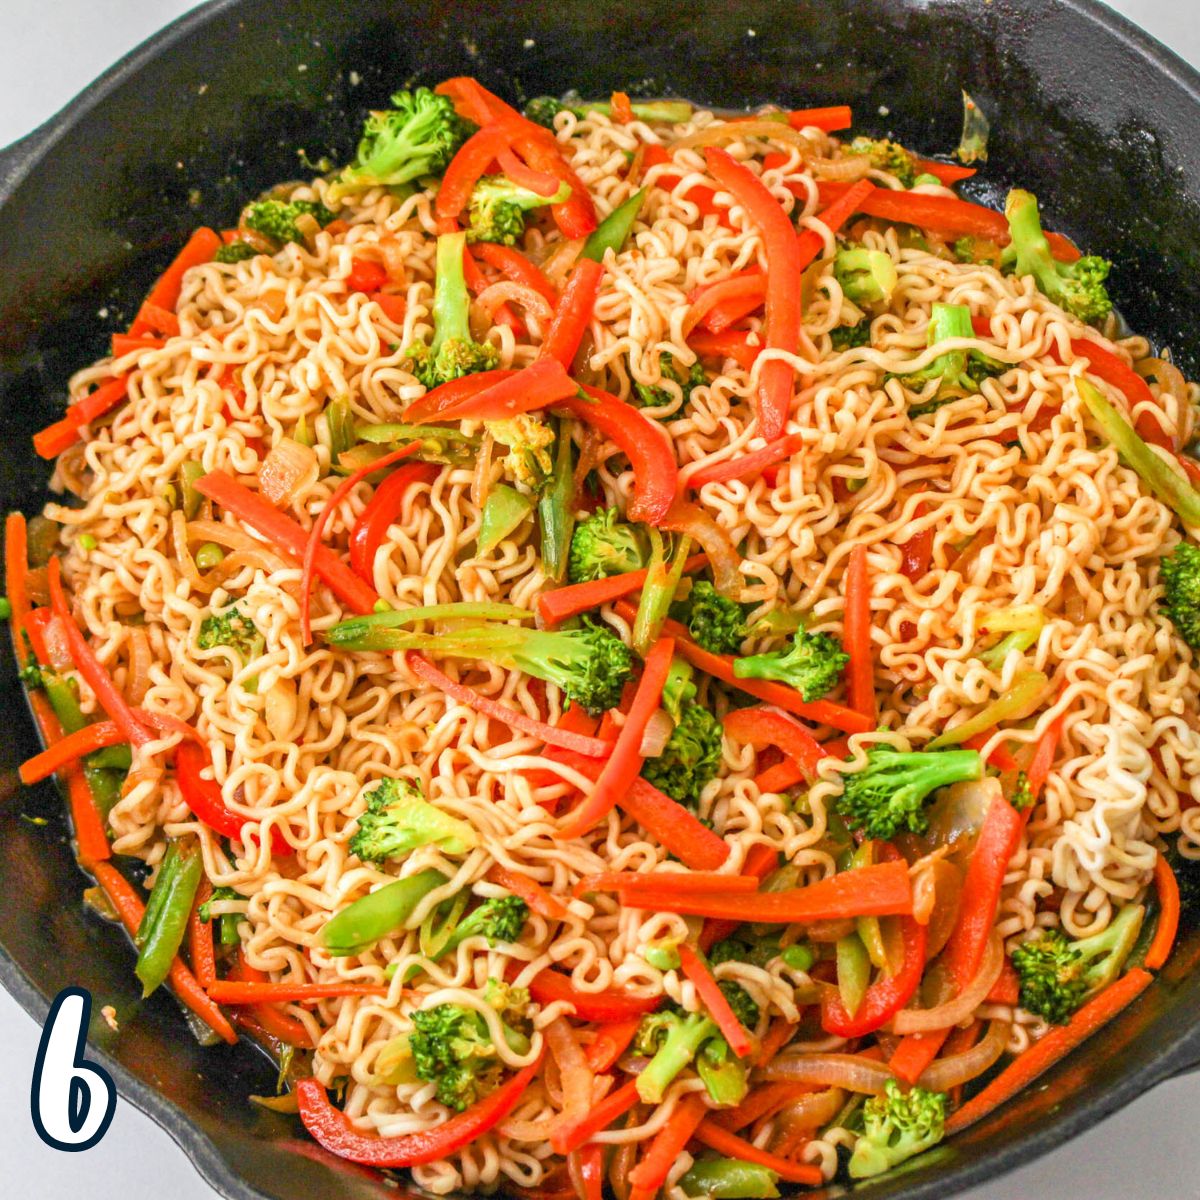 A pan with noodles and vegetables in it.